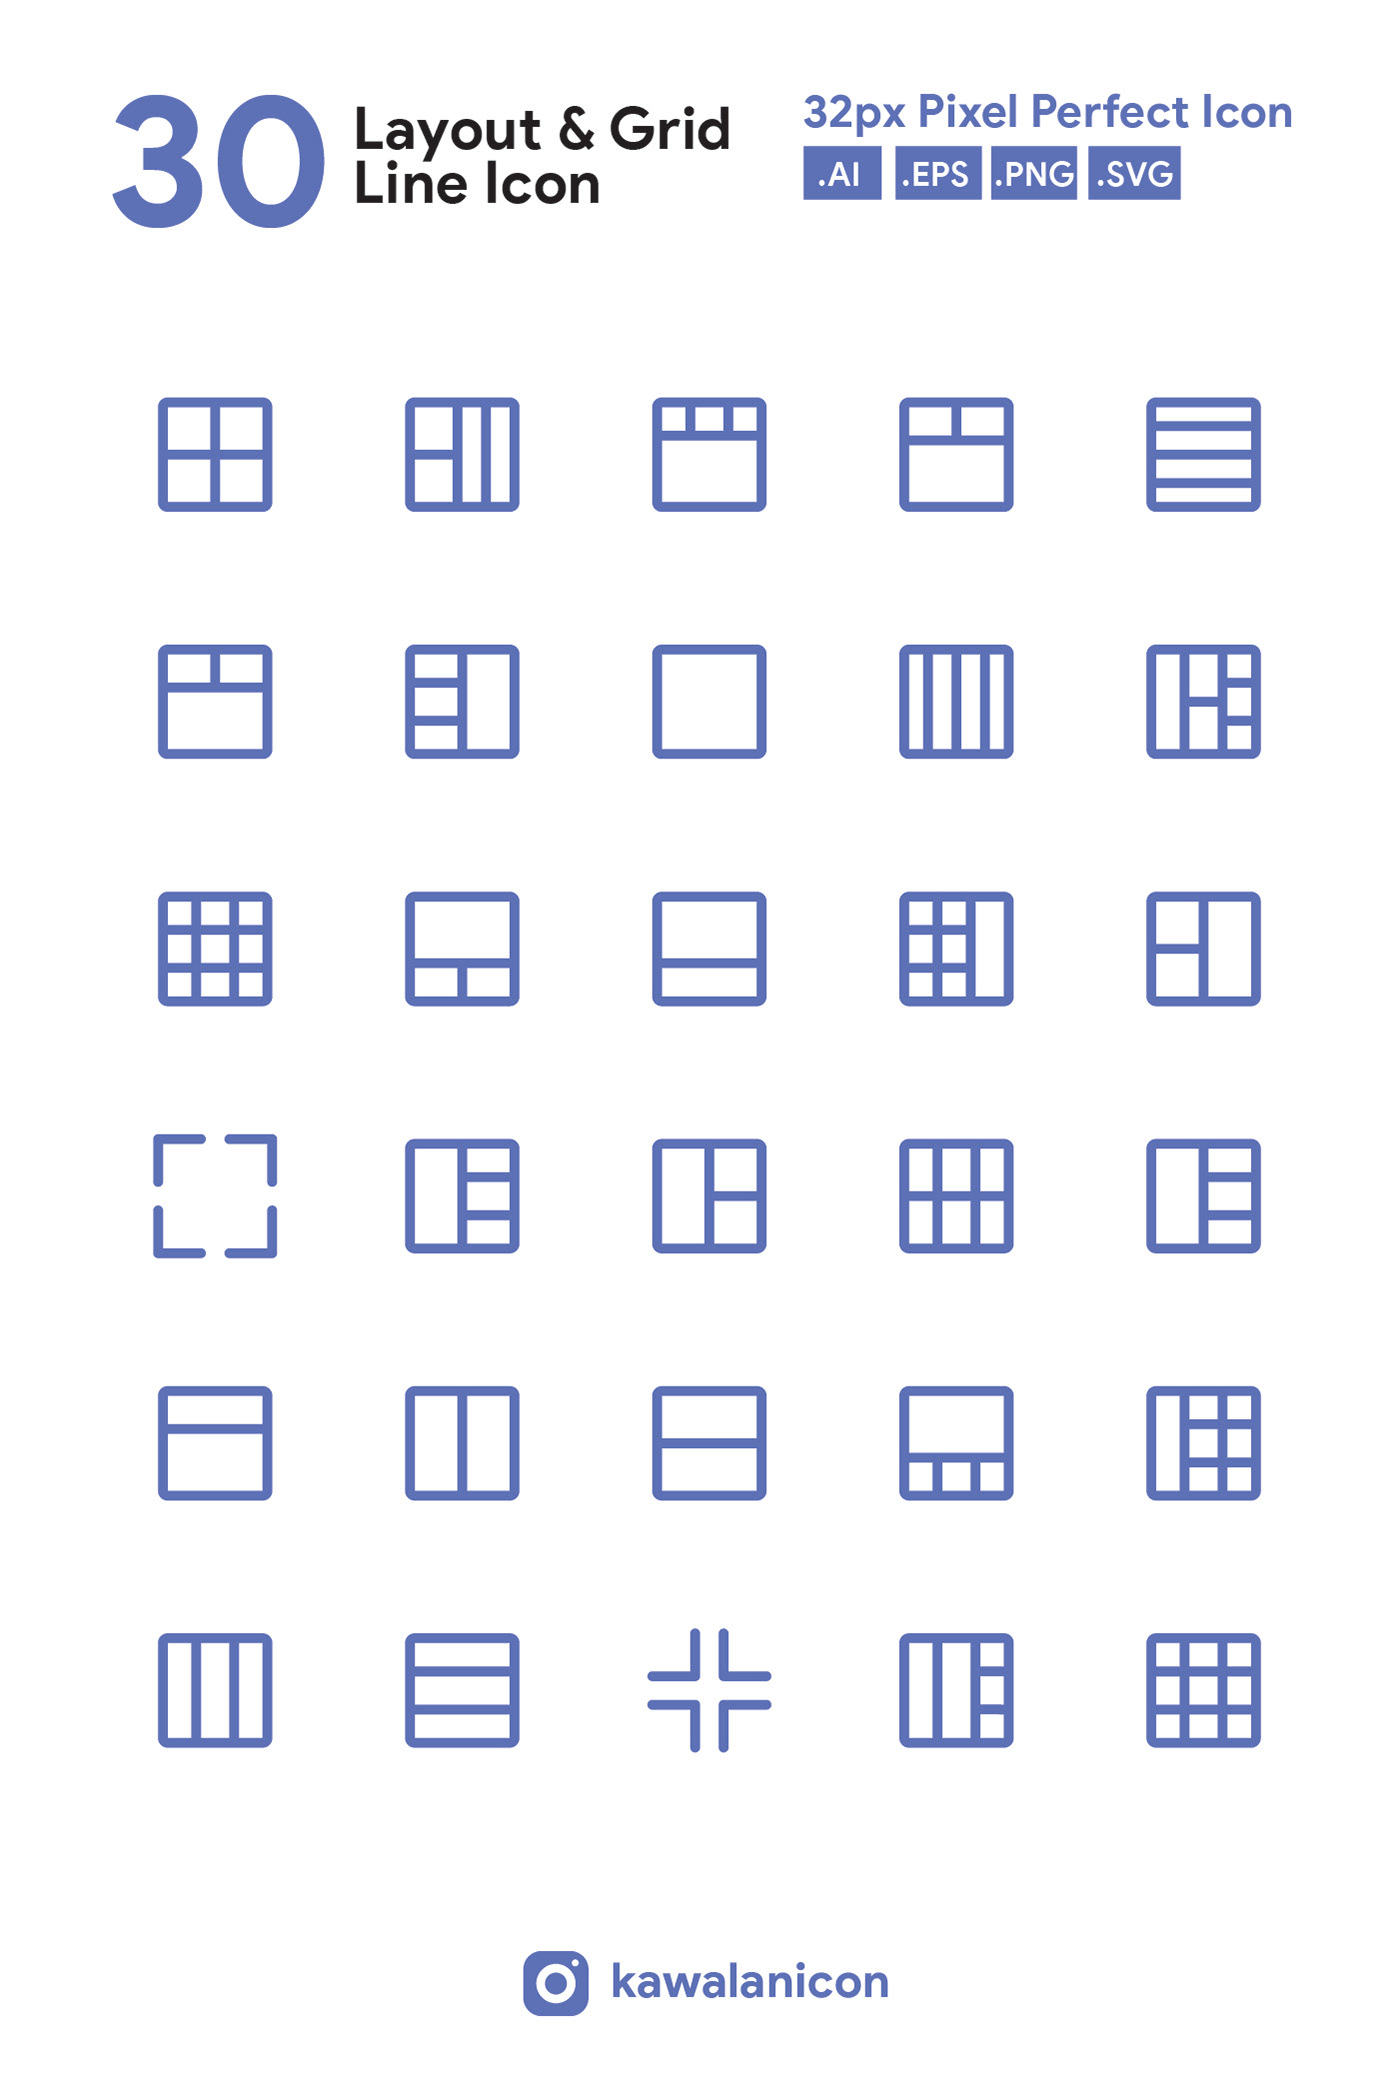 Layout grid Layout & Grid line icon icon set pictogram icon design  iconography Pixel Perfect icons